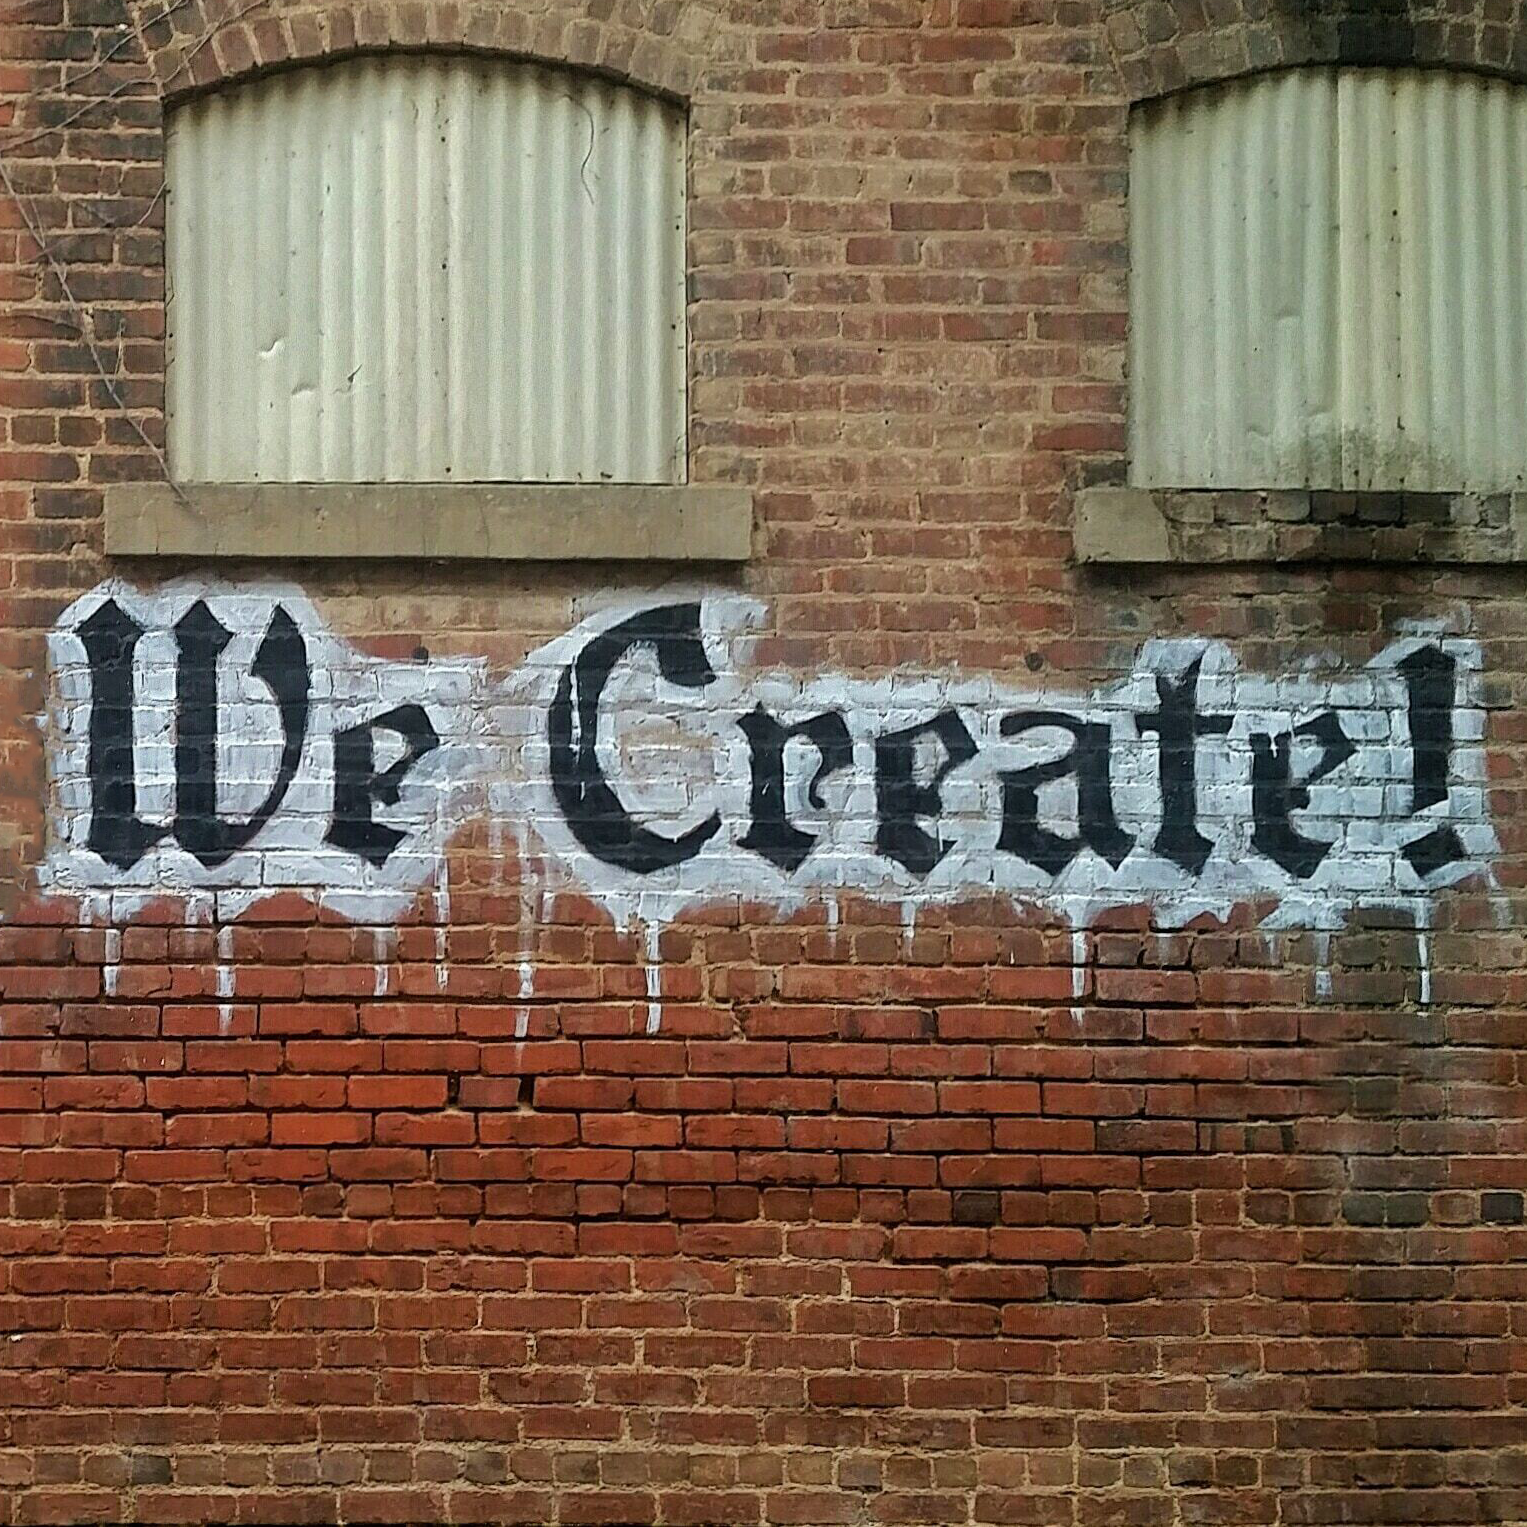 Image of a red brick wall. On the wall is written in black and white: "We Create".